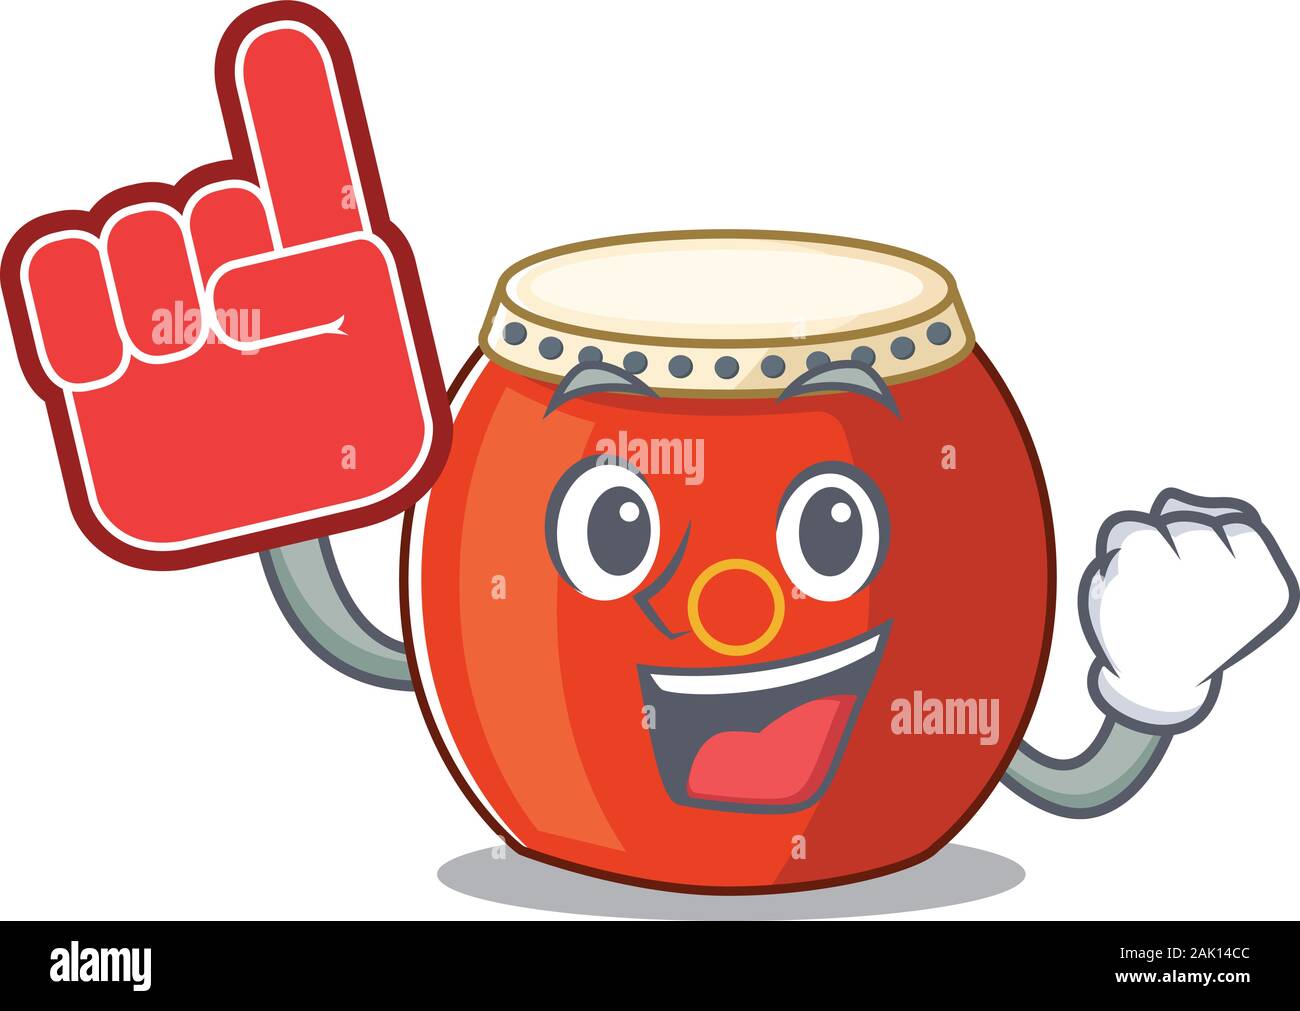 Chinese drum mascot cartoon style holding a Foam finger Stock Vector